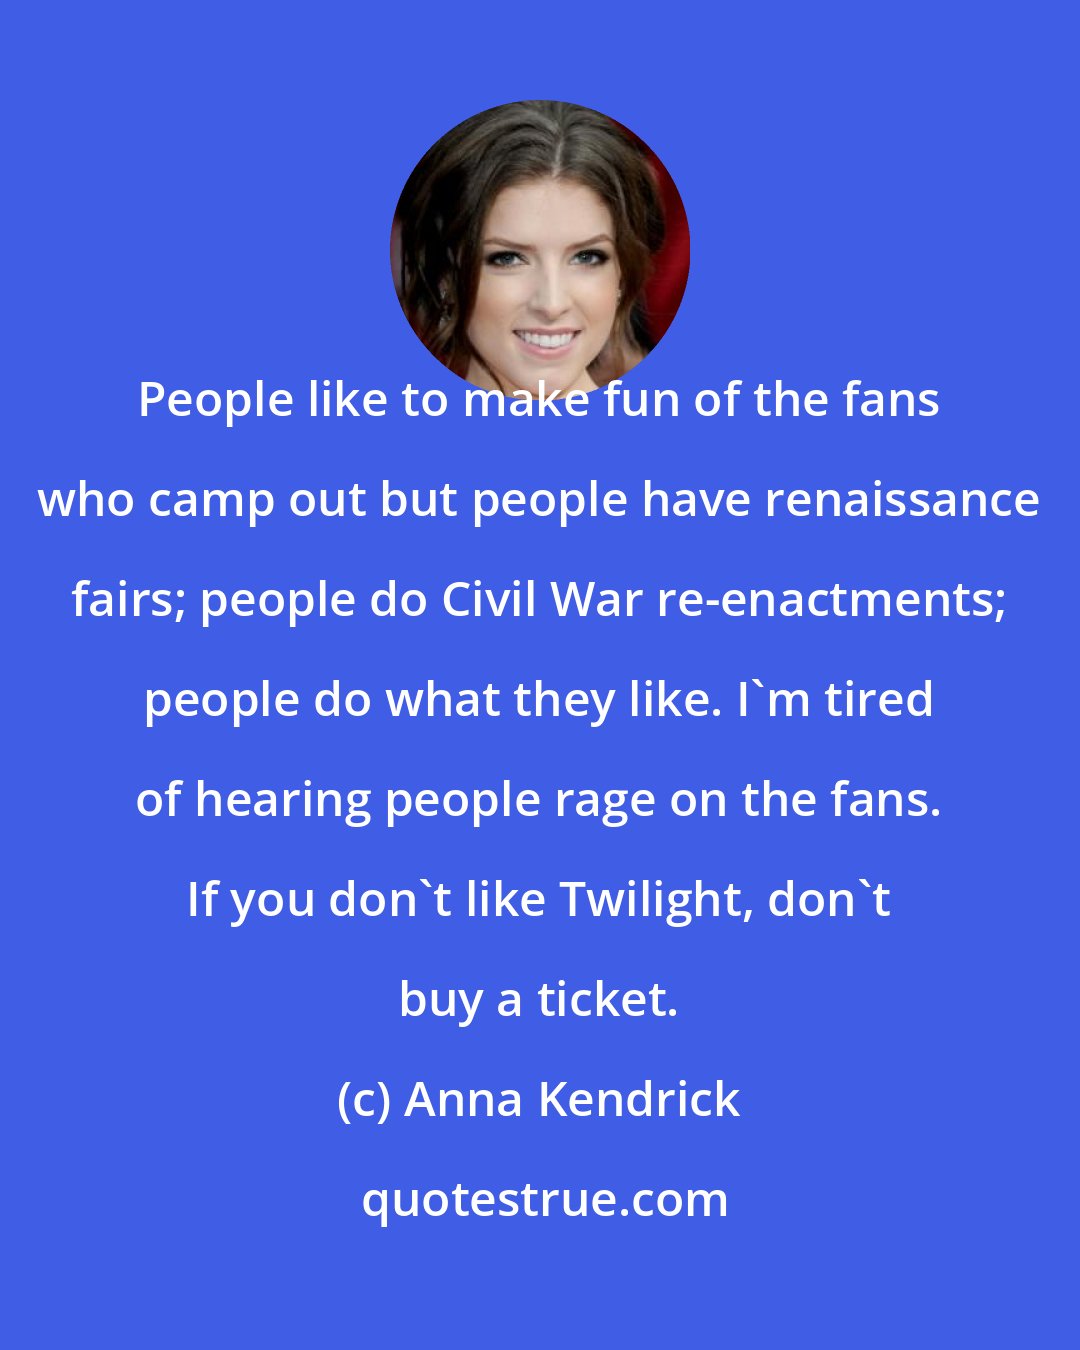 Anna Kendrick: People like to make fun of the fans who camp out but people have renaissance fairs; people do Civil War re-enactments; people do what they like. I'm tired of hearing people rage on the fans. If you don't like Twilight, don't buy a ticket.